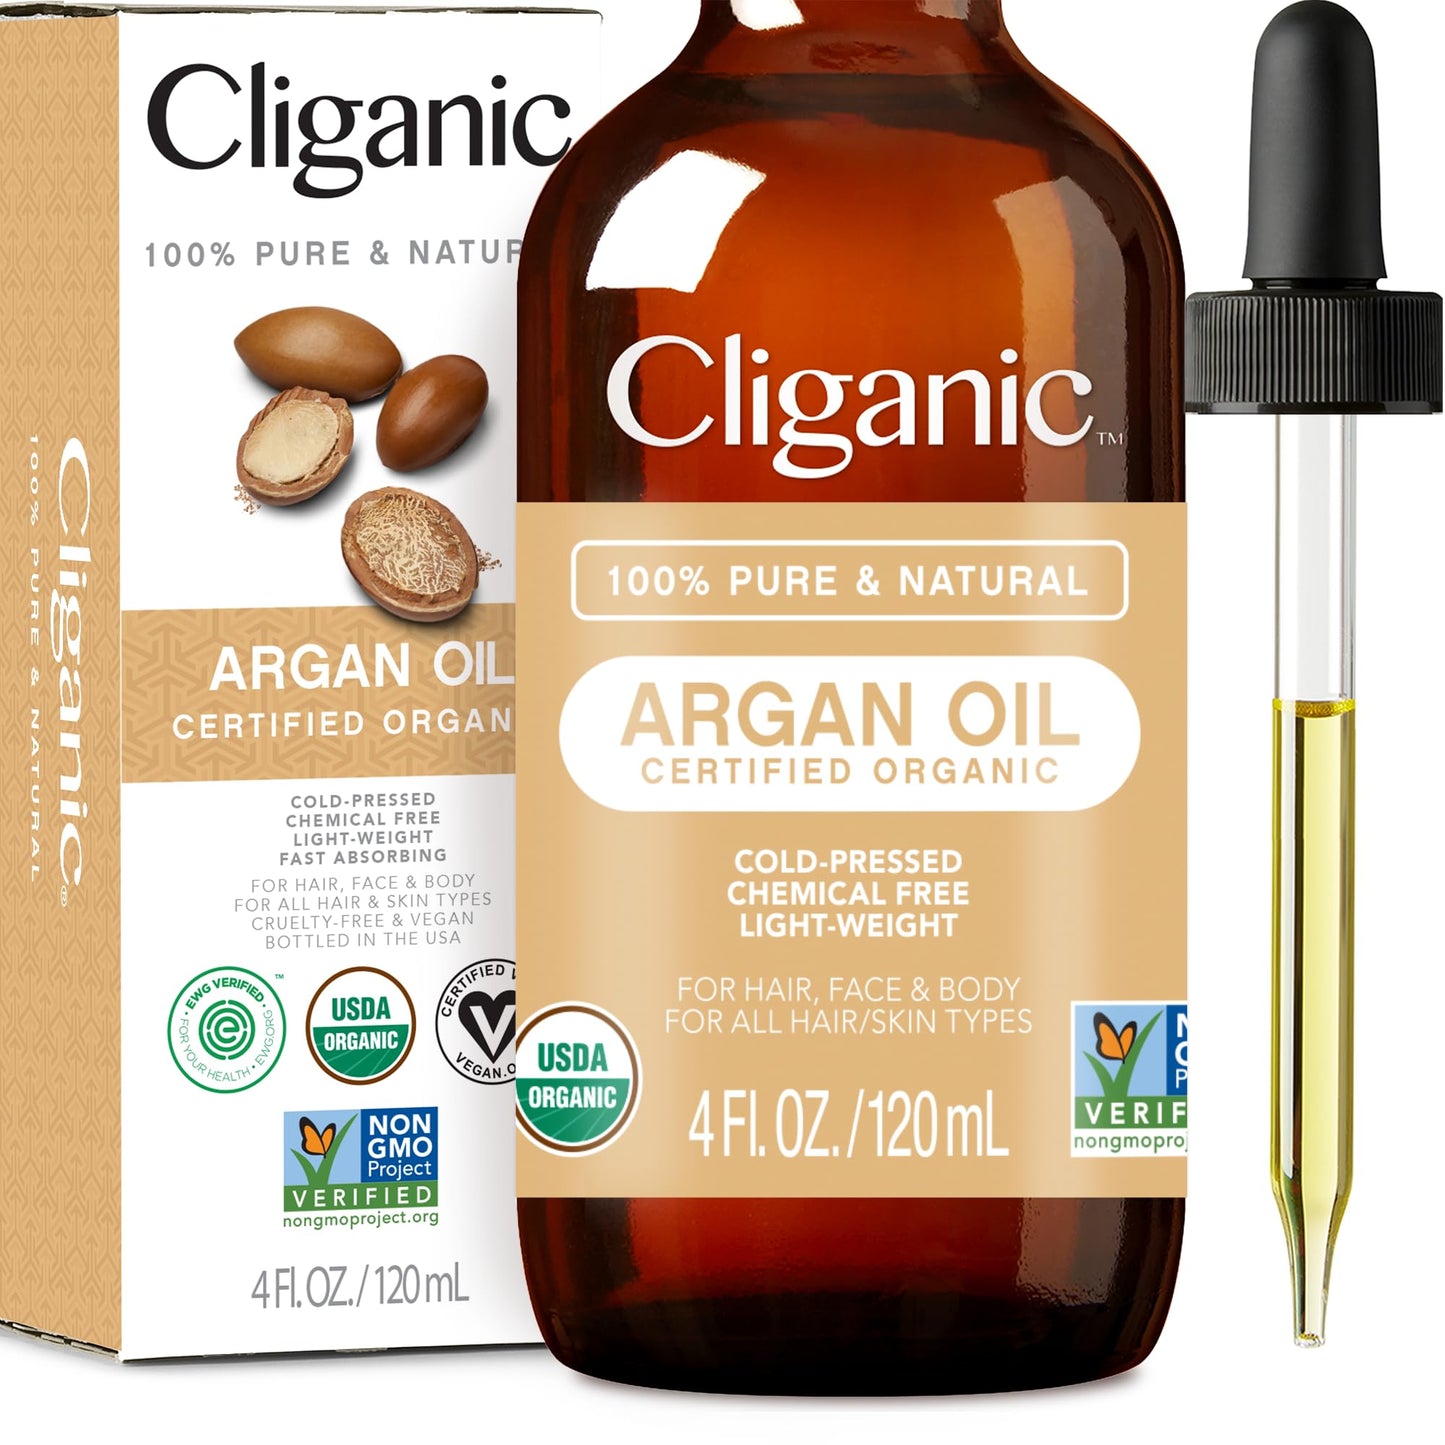 Cliganic Organic Argan Oil 100% Pure 120 ml Moroccan Argan Oil for Hair, Face and Skin Natural Cold-Pressed Carrier Oil